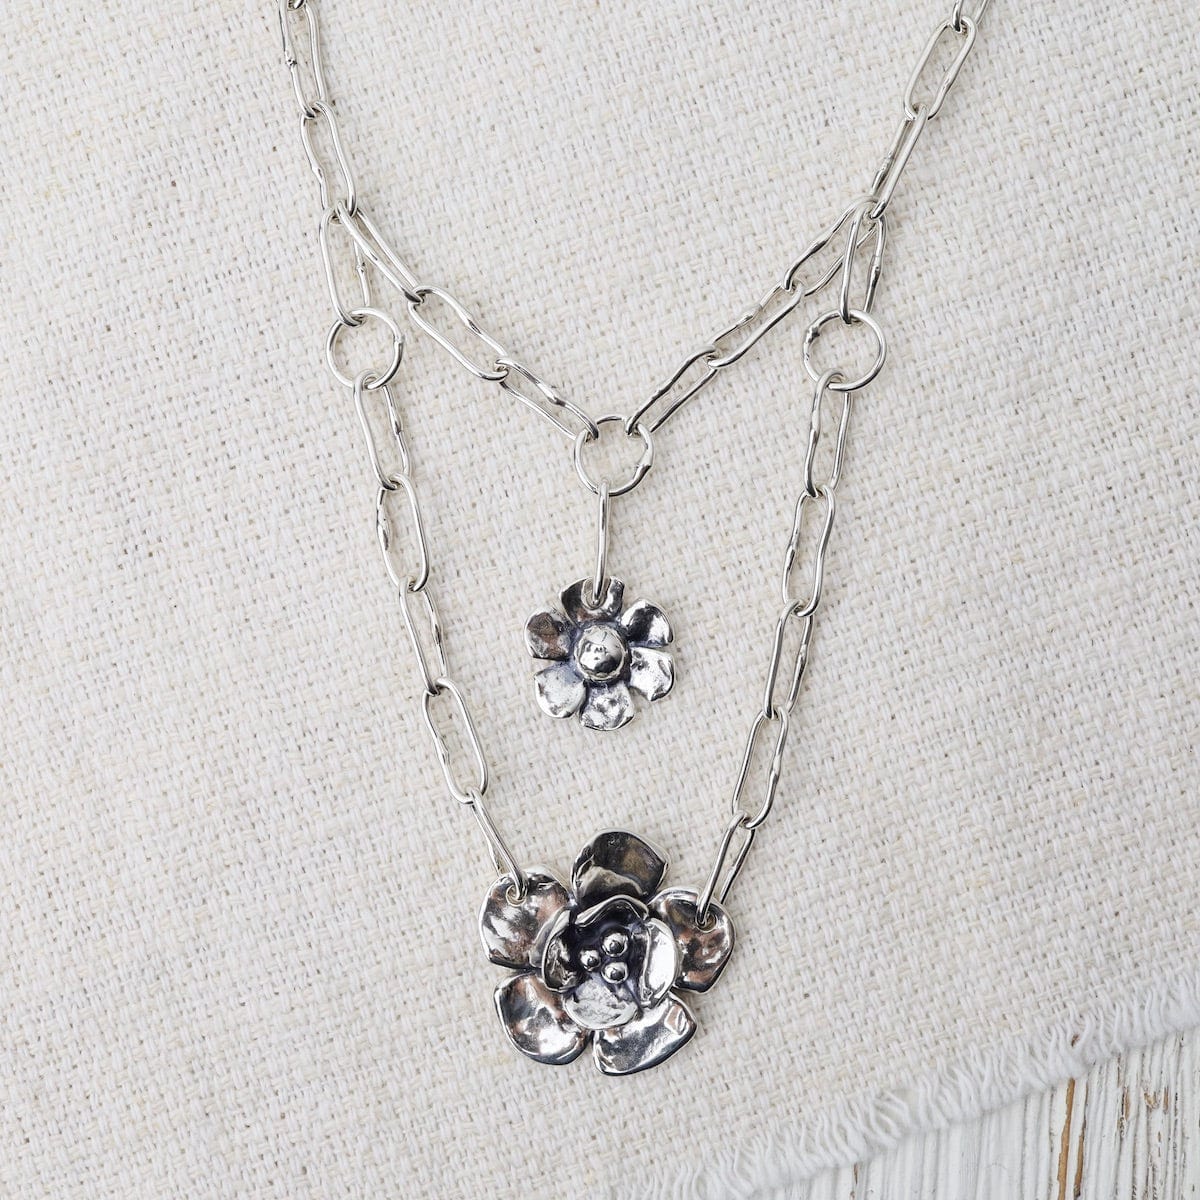 NKL Chain Layer Necklace With Daisy & Double Dogwood on Short Oval Chain